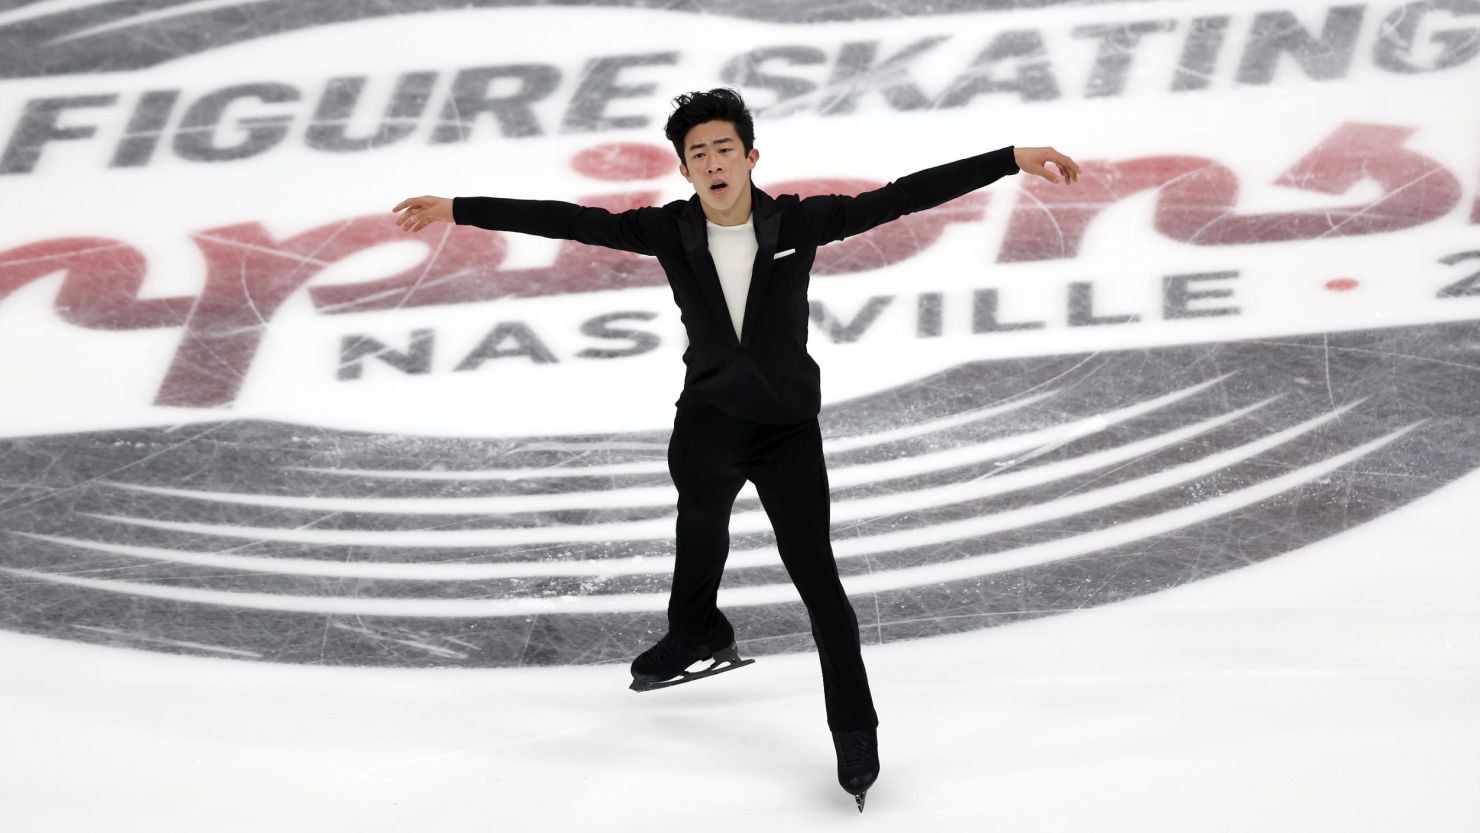 Chen produced a dazzling performance in the men's short program at the US Figure Skating Championships. 